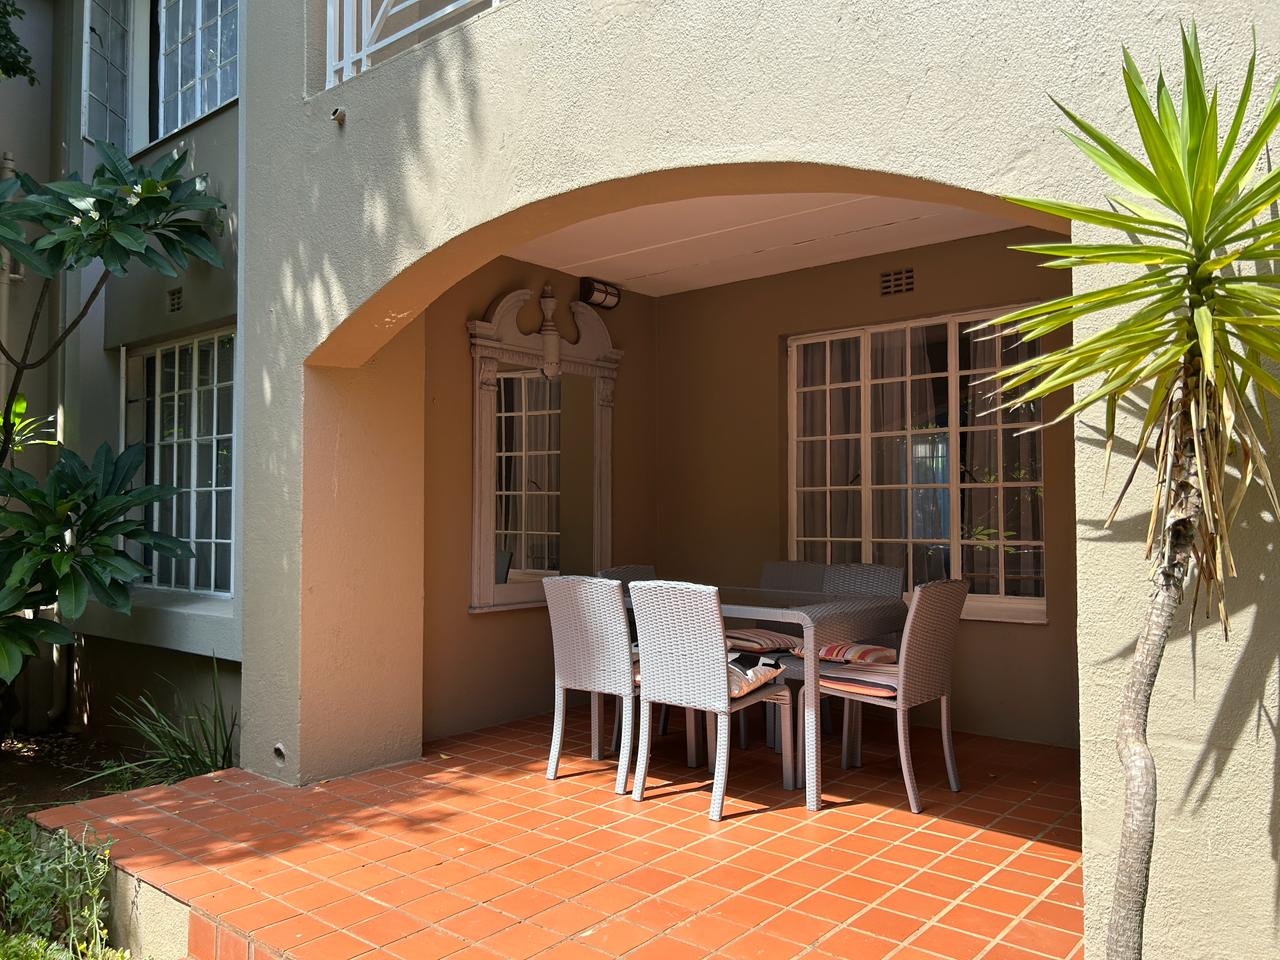 3 Bedroom Property for Sale in Robindale Gauteng